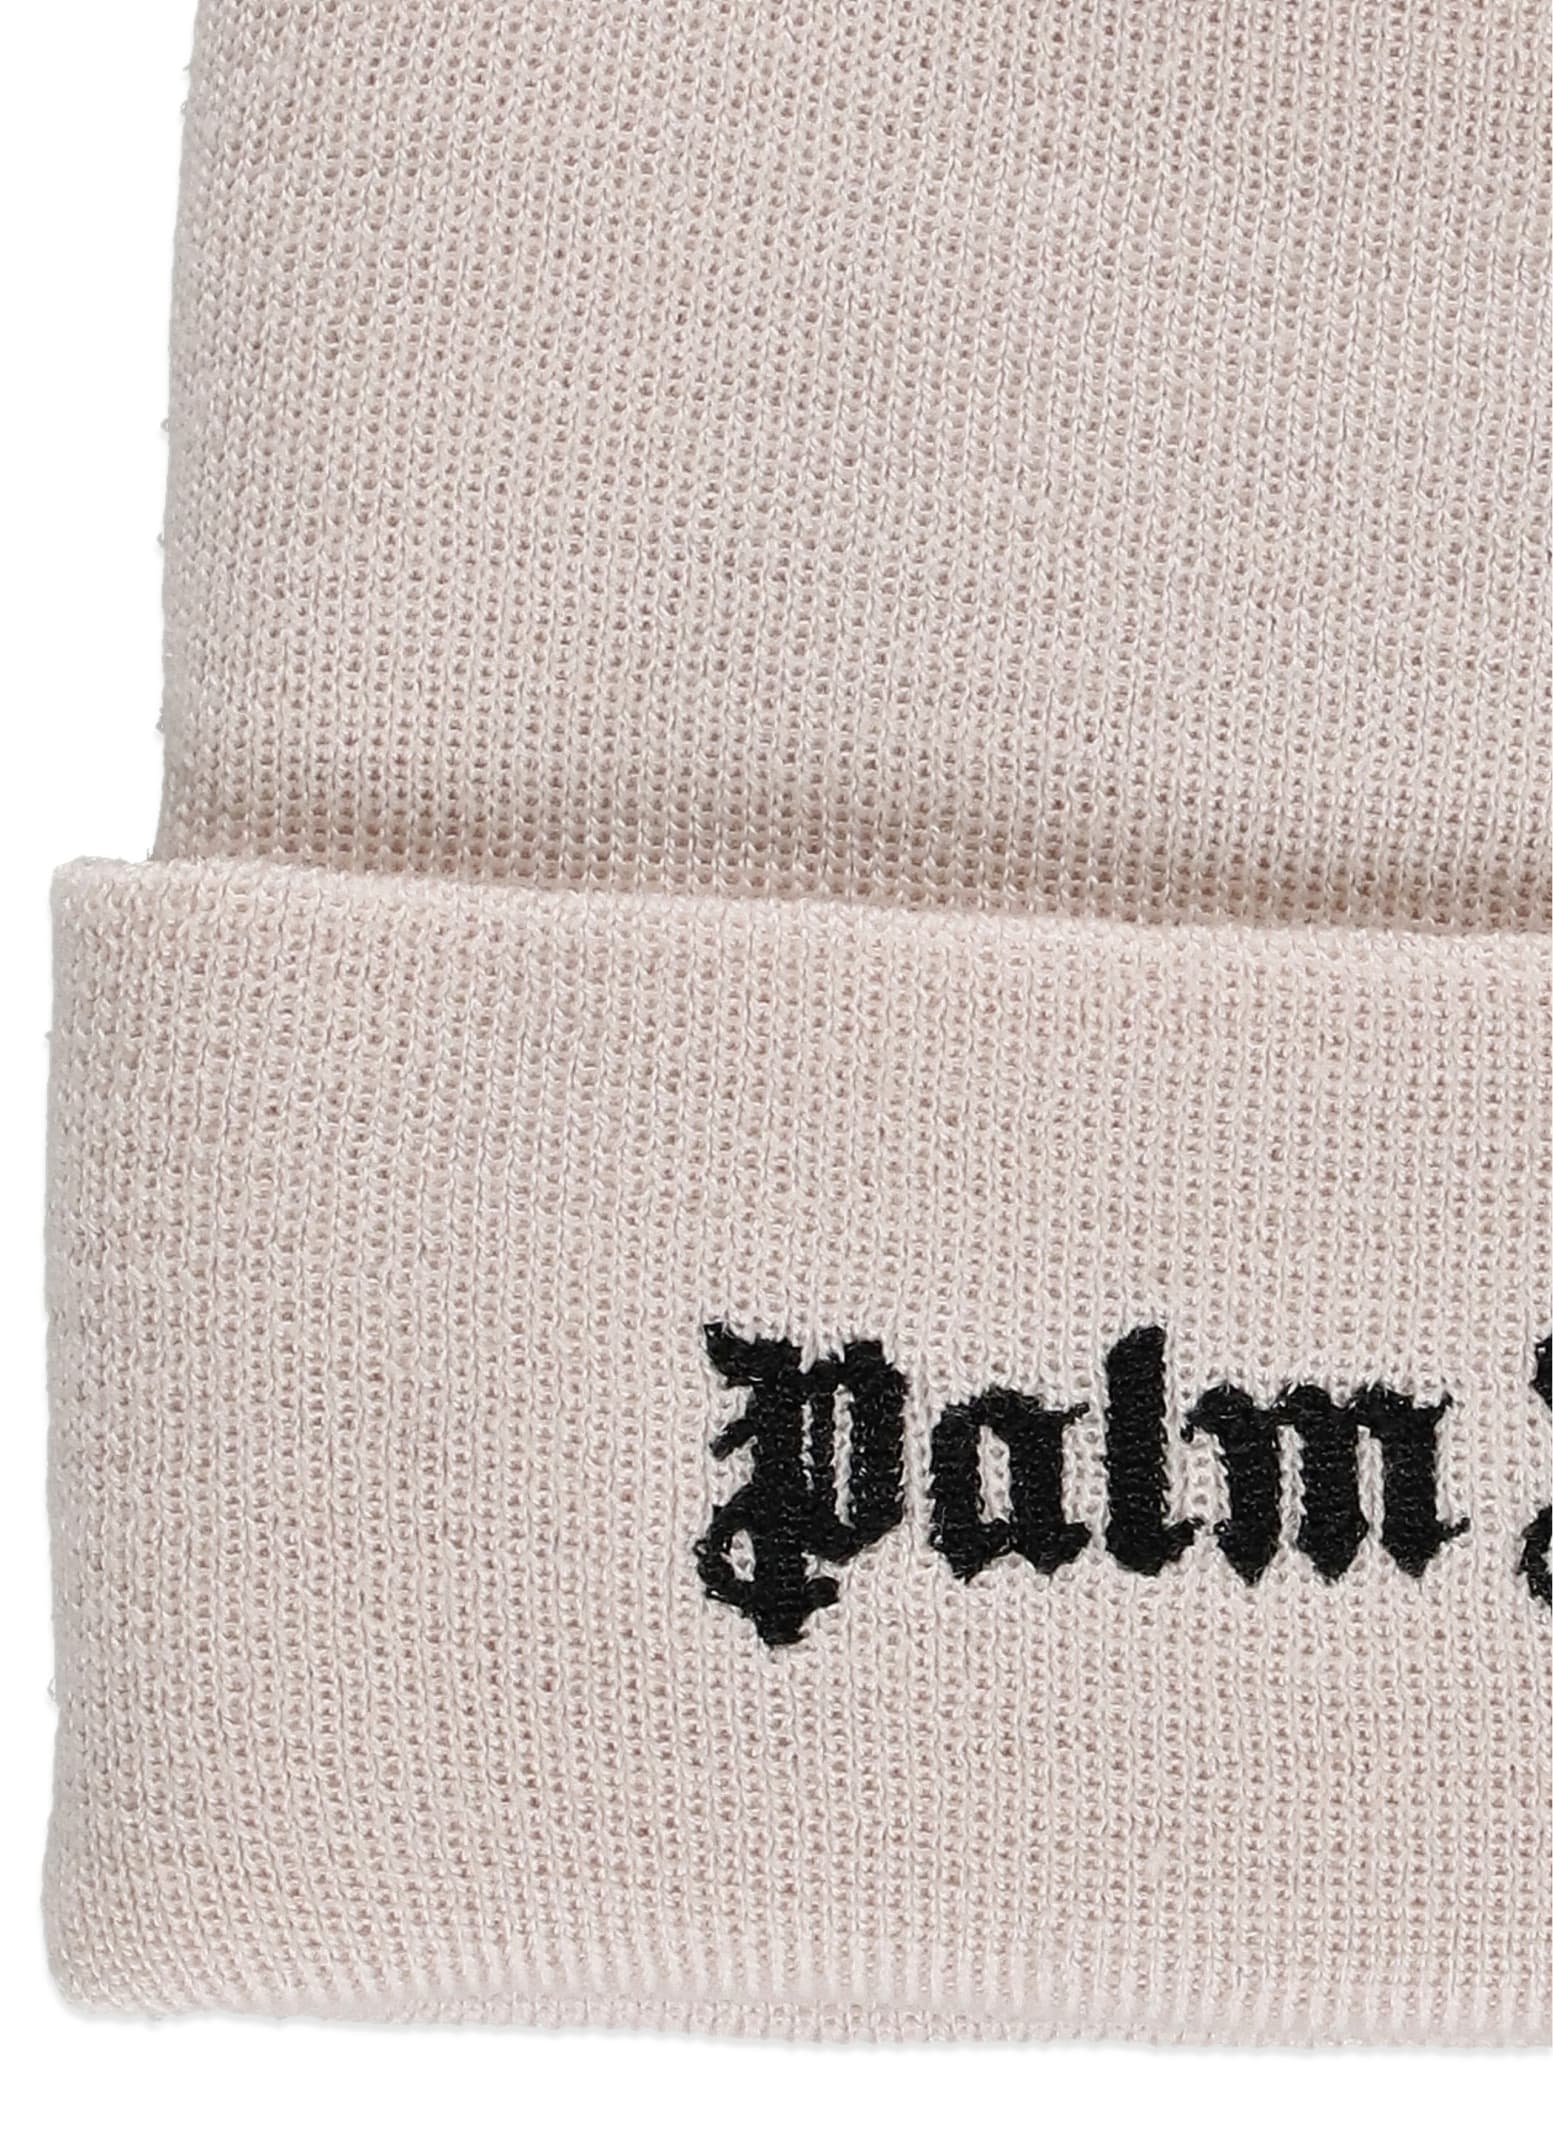 Shop Palm Angels Logoed Beanie In Pink